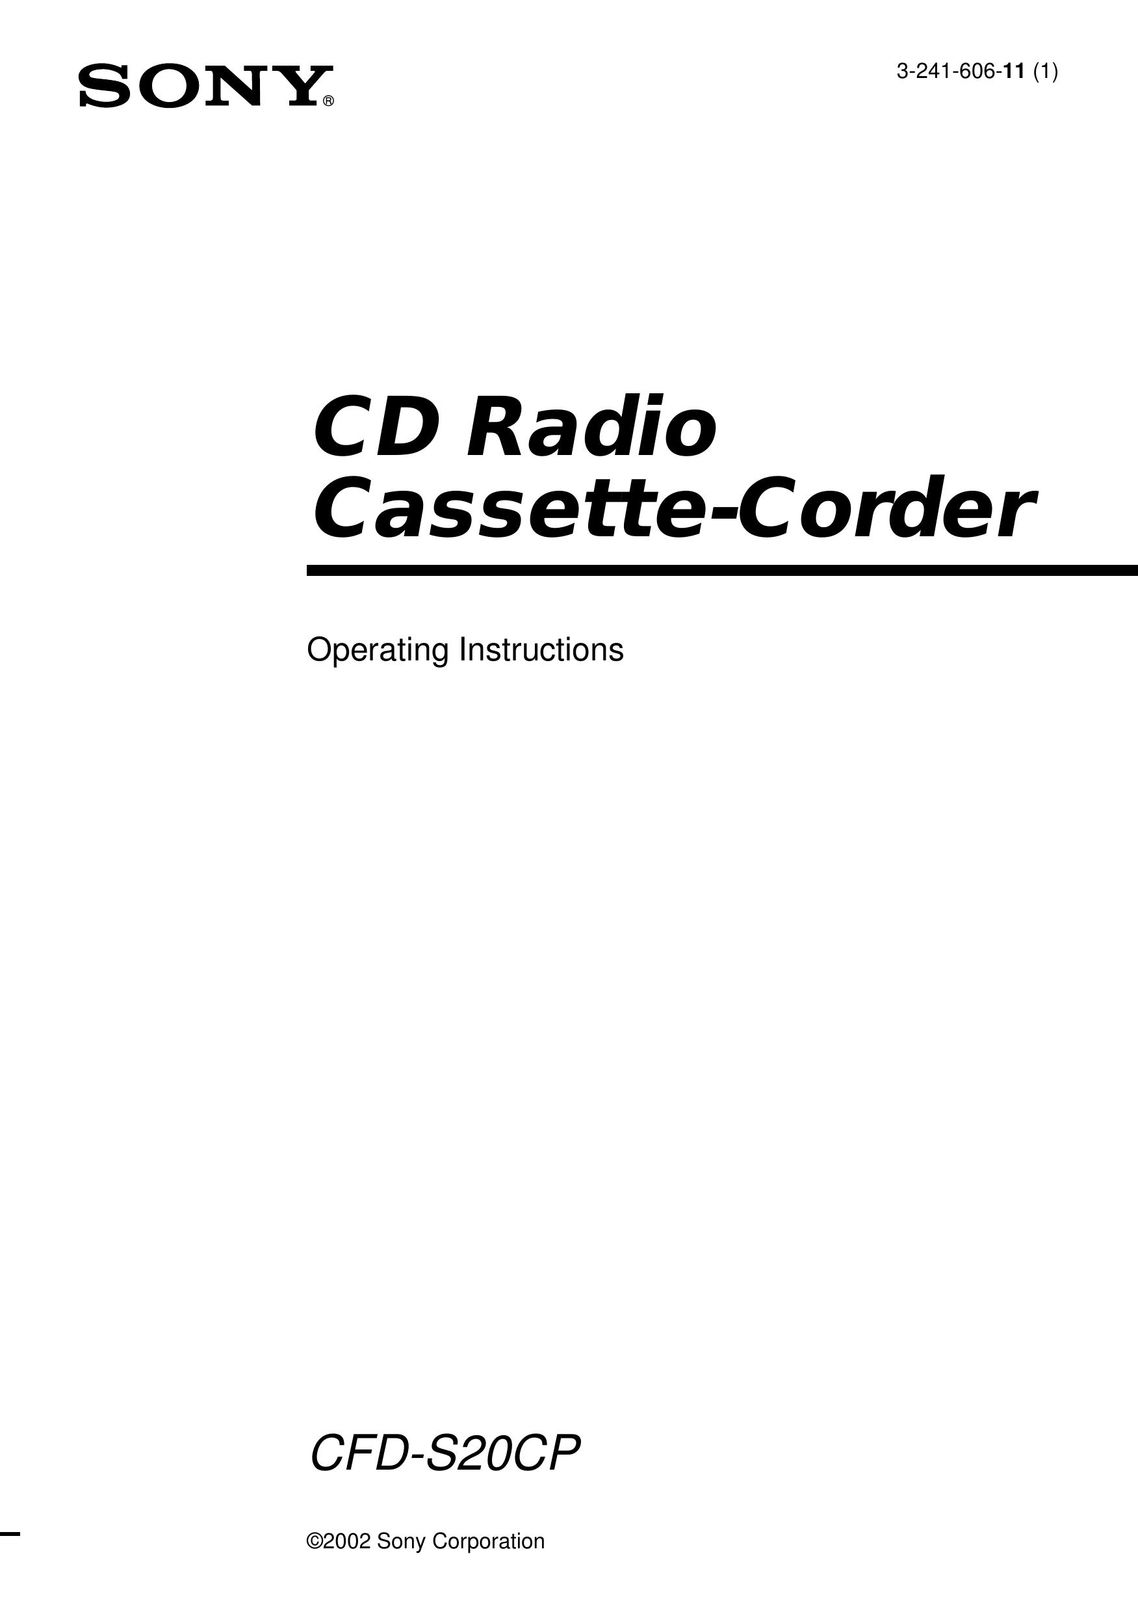 Sony cCFD-S20CP Cassette Player User Manual